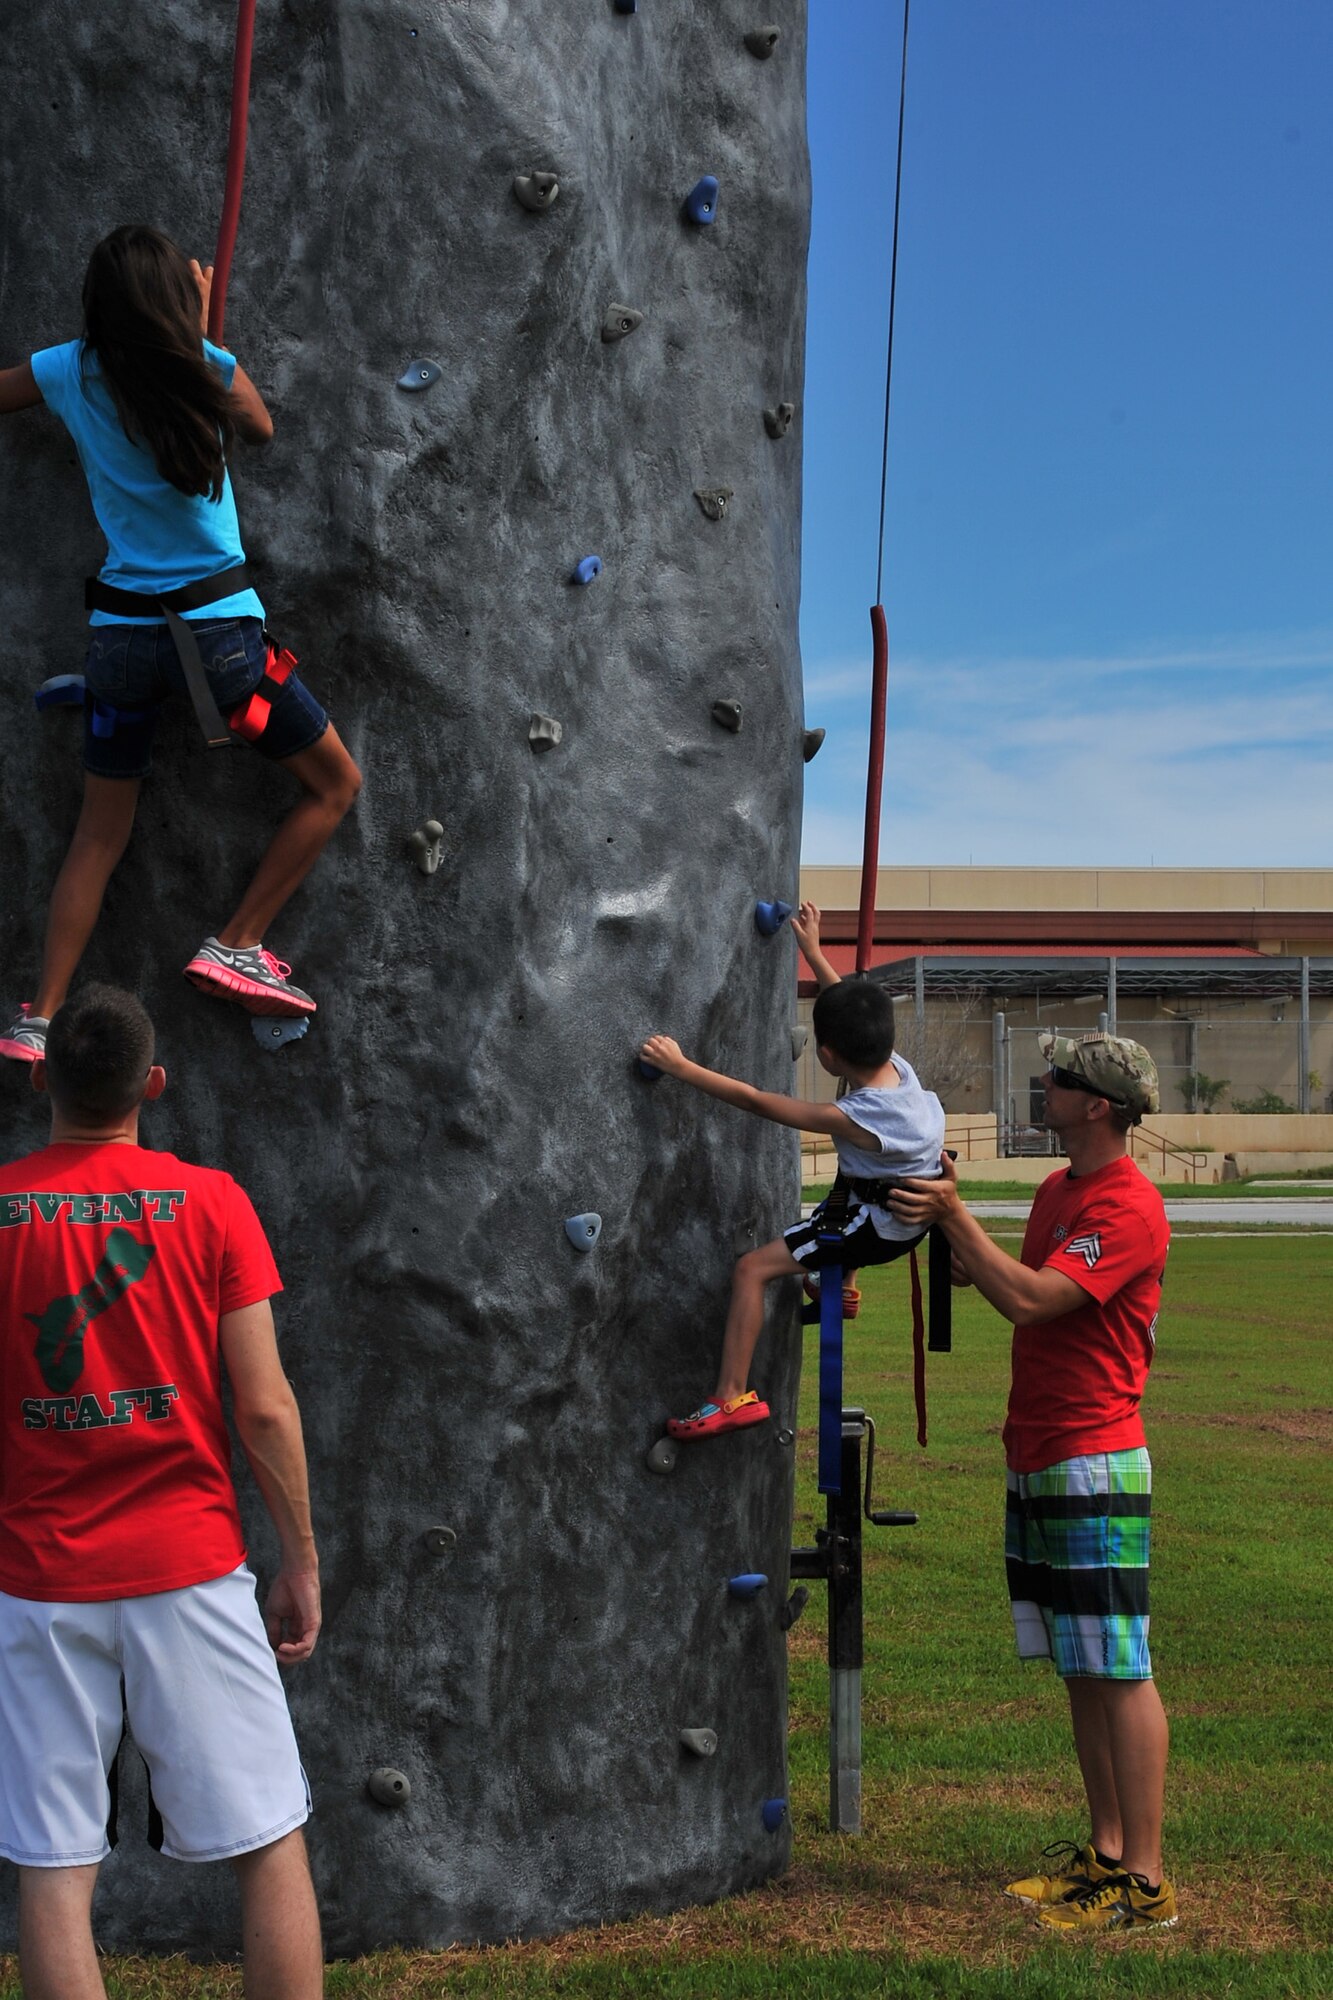 Staff Sgt. Jeff Wirgau (left) and Steve Baker (right), both from the 736th Security Forces Squadron, help children climb a rock wall during the Labor Day Bash Aug. 30, 2013, on Andersen Air Force Base, Guam. More than 200 military members and their families attended the event which was held at the Arc Light Memorial Park. (U.S. Air Force photo/Staff Sgt. Melissa B. White/Released)